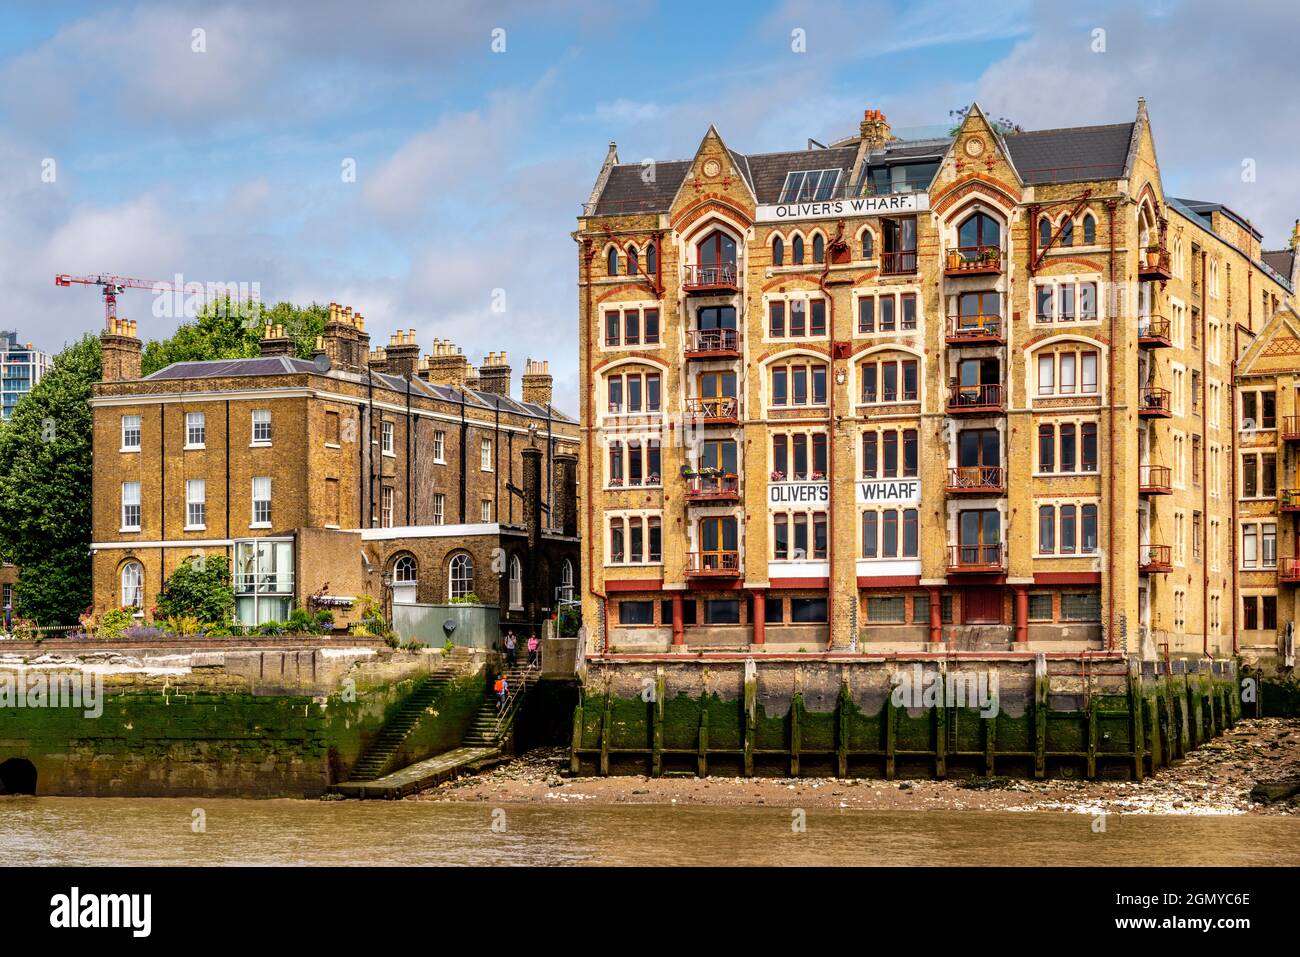 Oliver's Wharf Apartment Building, The River Thames and the Wapping Old Stairs, London, Großbritannien. Stockfoto